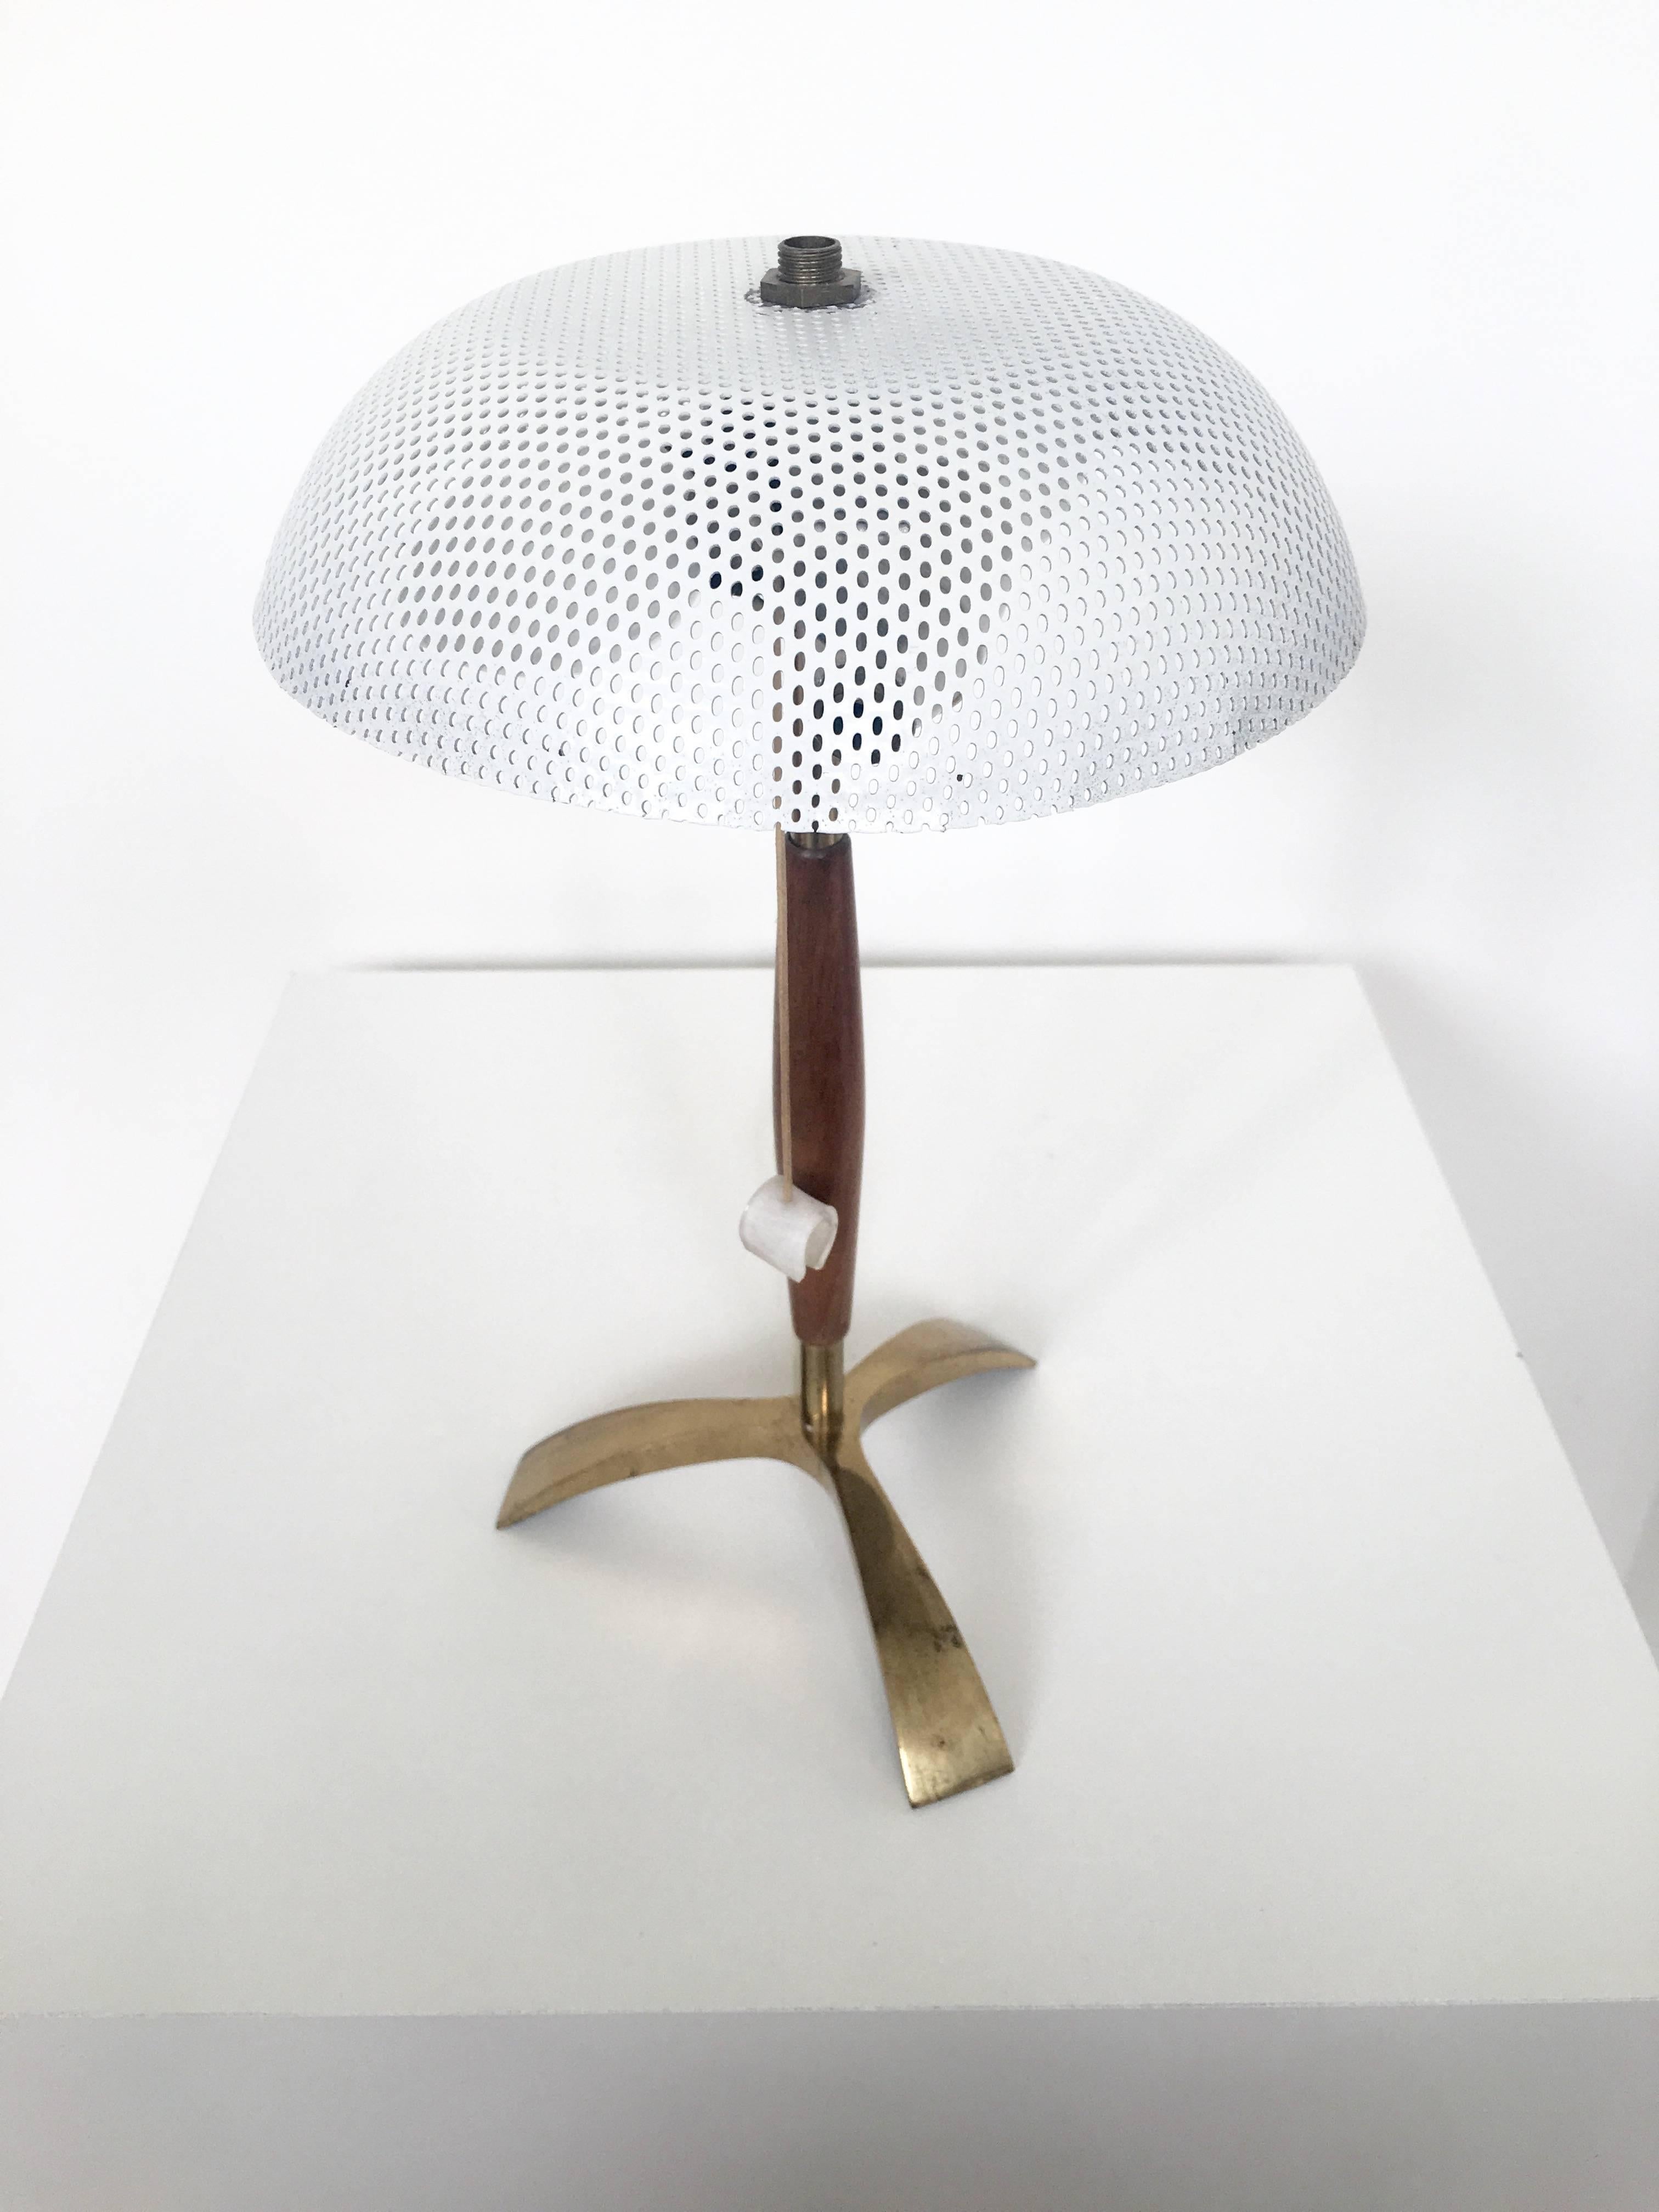 An adorable and unique small French lamp in the style of Mathieu Matégot. The lampshade is a white perforated metal and the base is a simple modern design in brass and wood. The lamp is in it's original wiring and takes two candelabra bulbs.